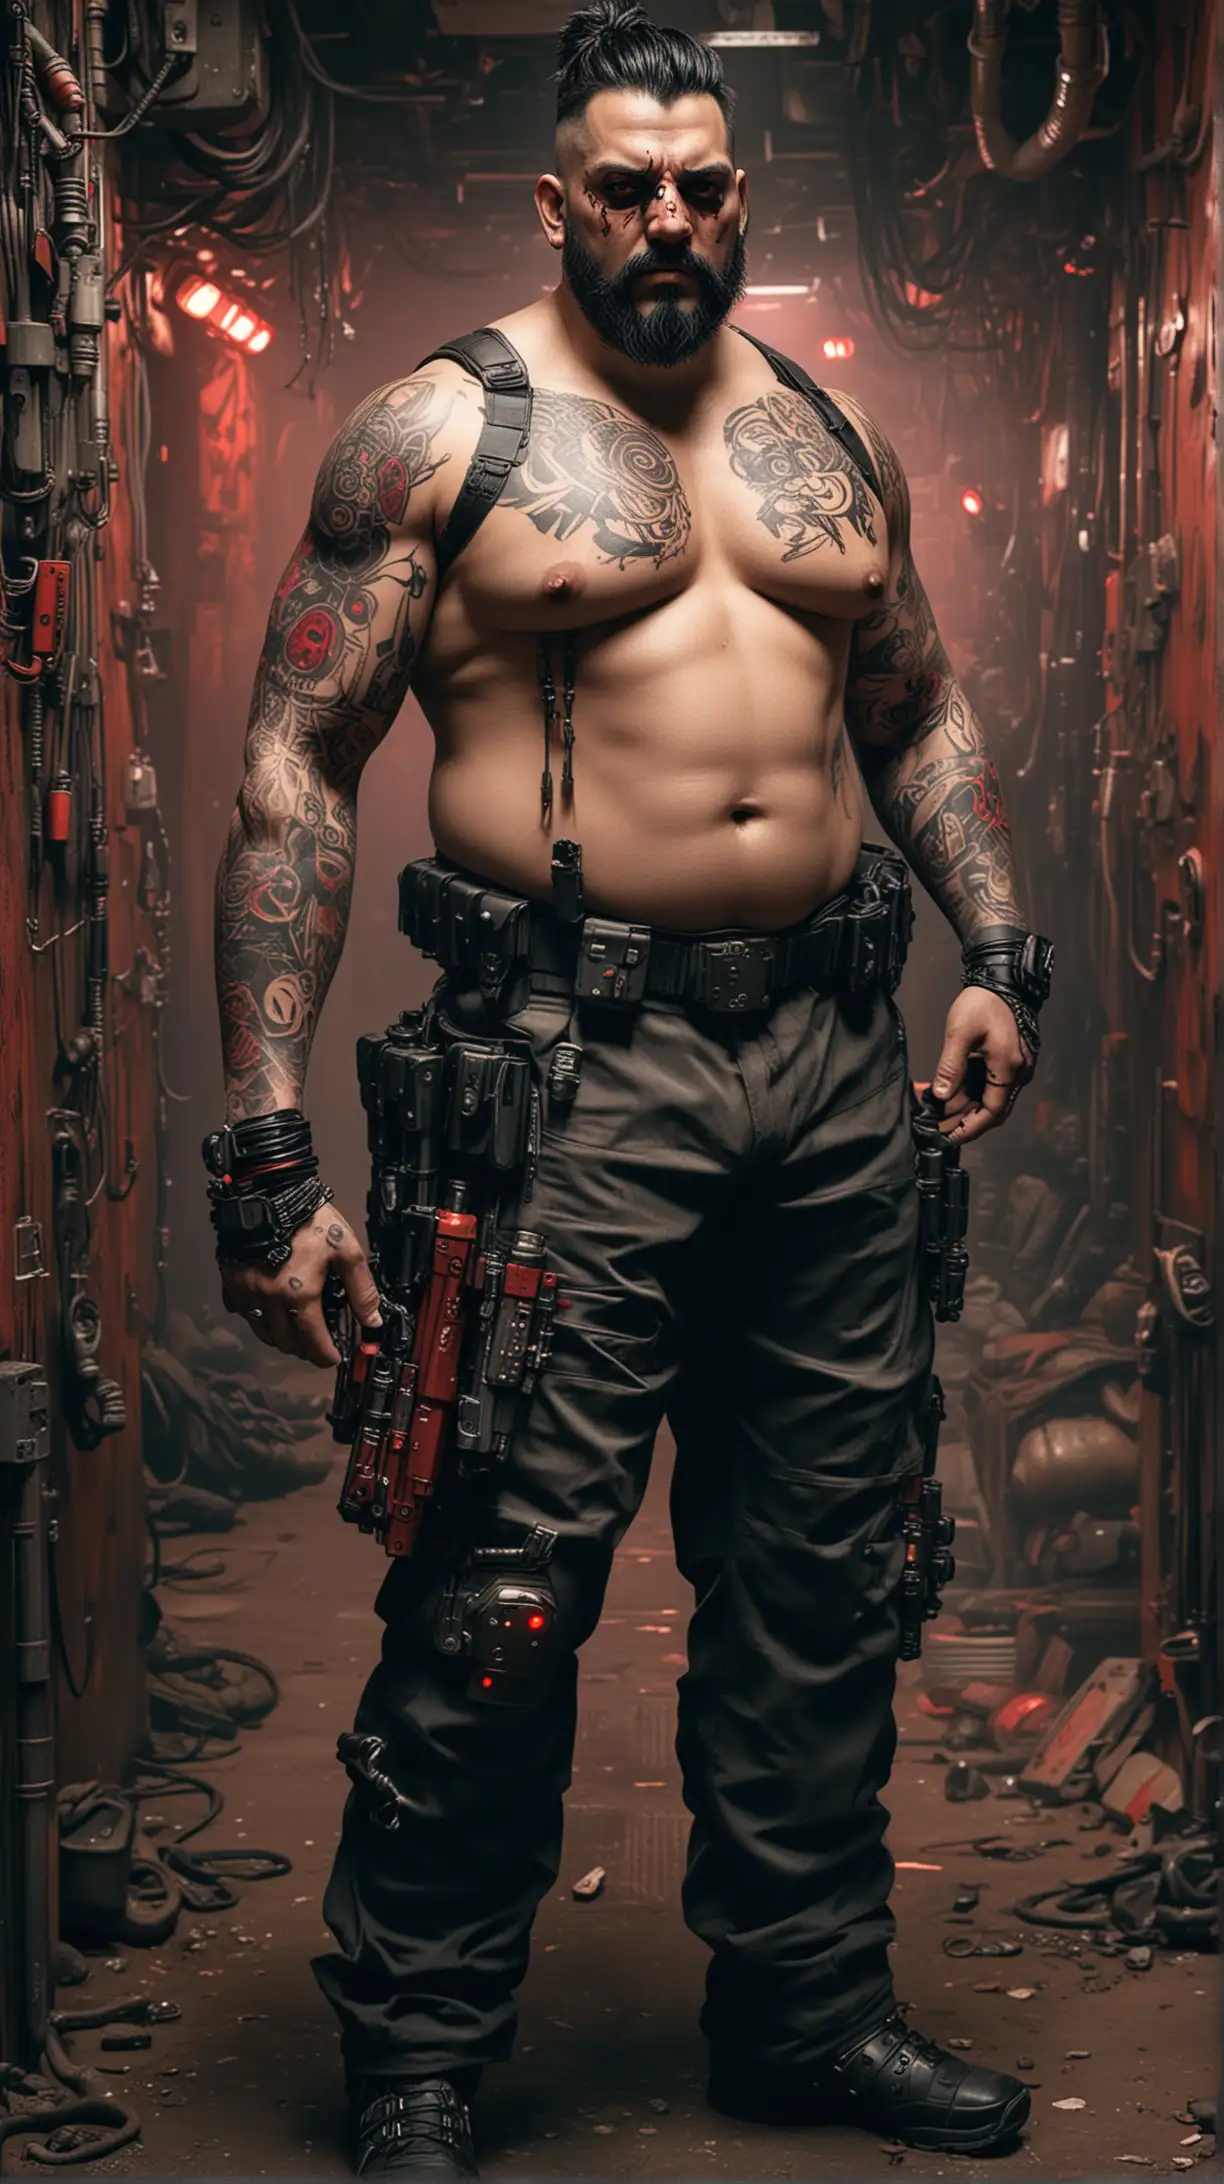 An image of a bulky, slightly overweight man with cybernetic implants, evil, red cybernetic eyes, tattoos, shirtless with tactical gear and trousers, black hair in a bun and bushy beard, inside an underground club, red atmosphere, in a detailed cyberpunk like style